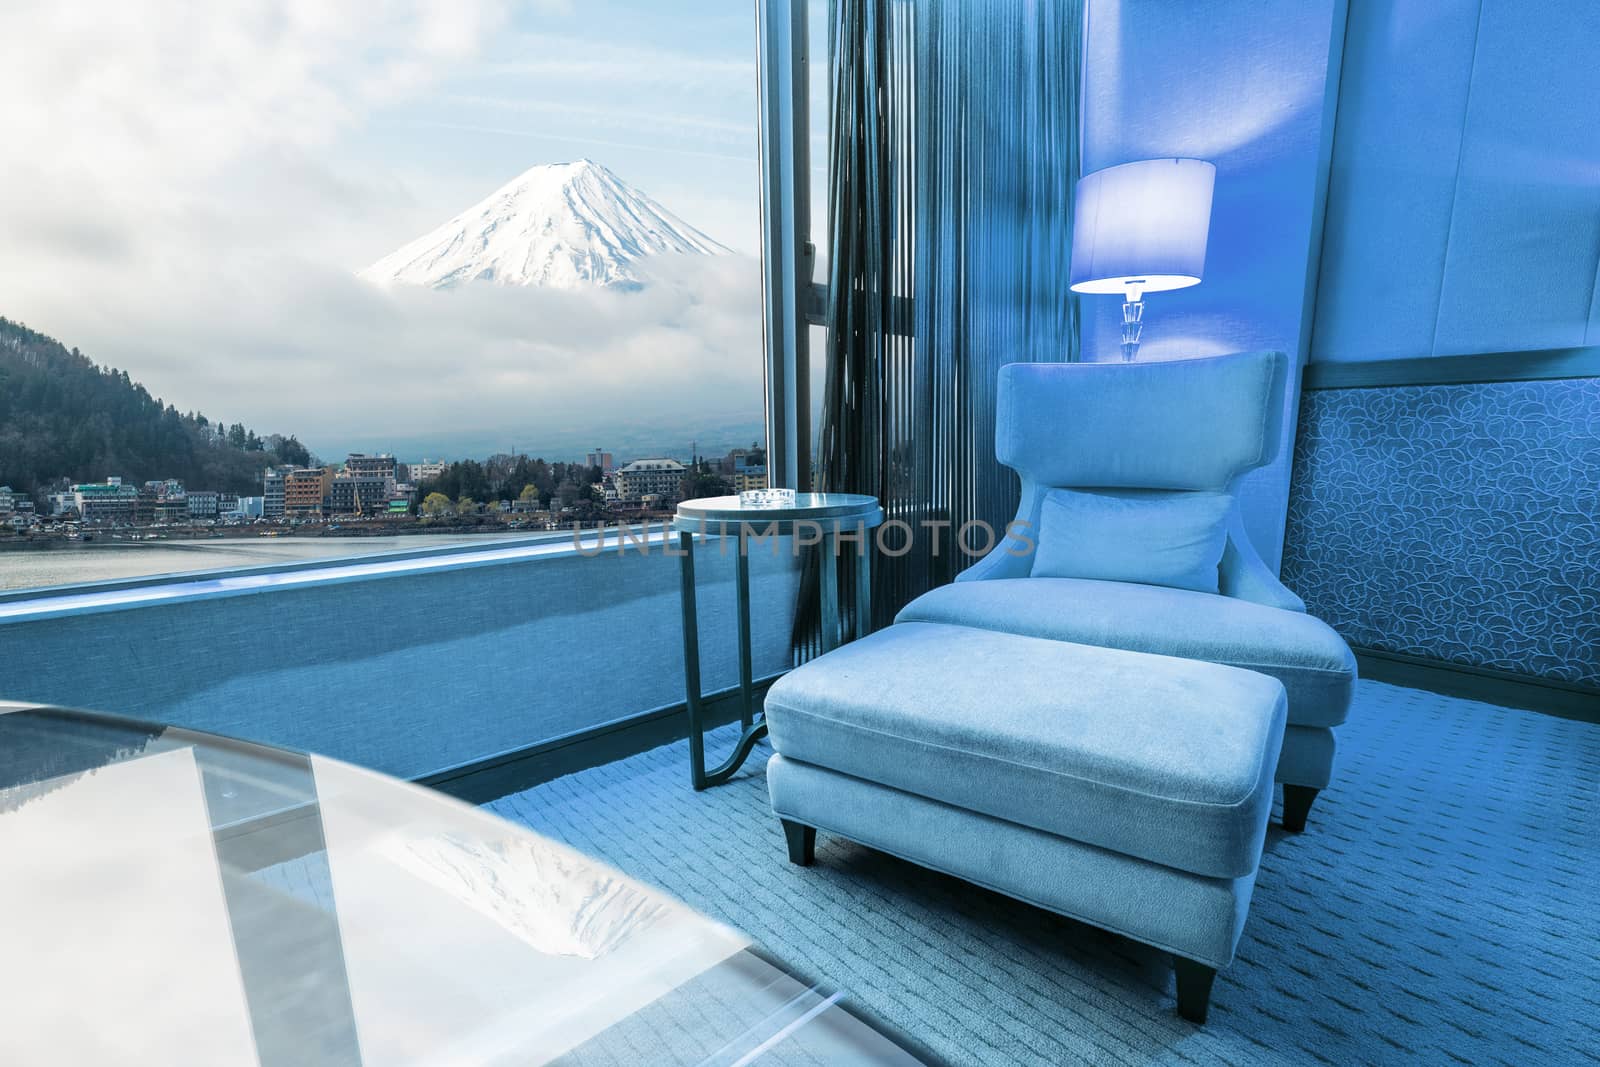 Retouch Sofa in living room in fuji mountain background 